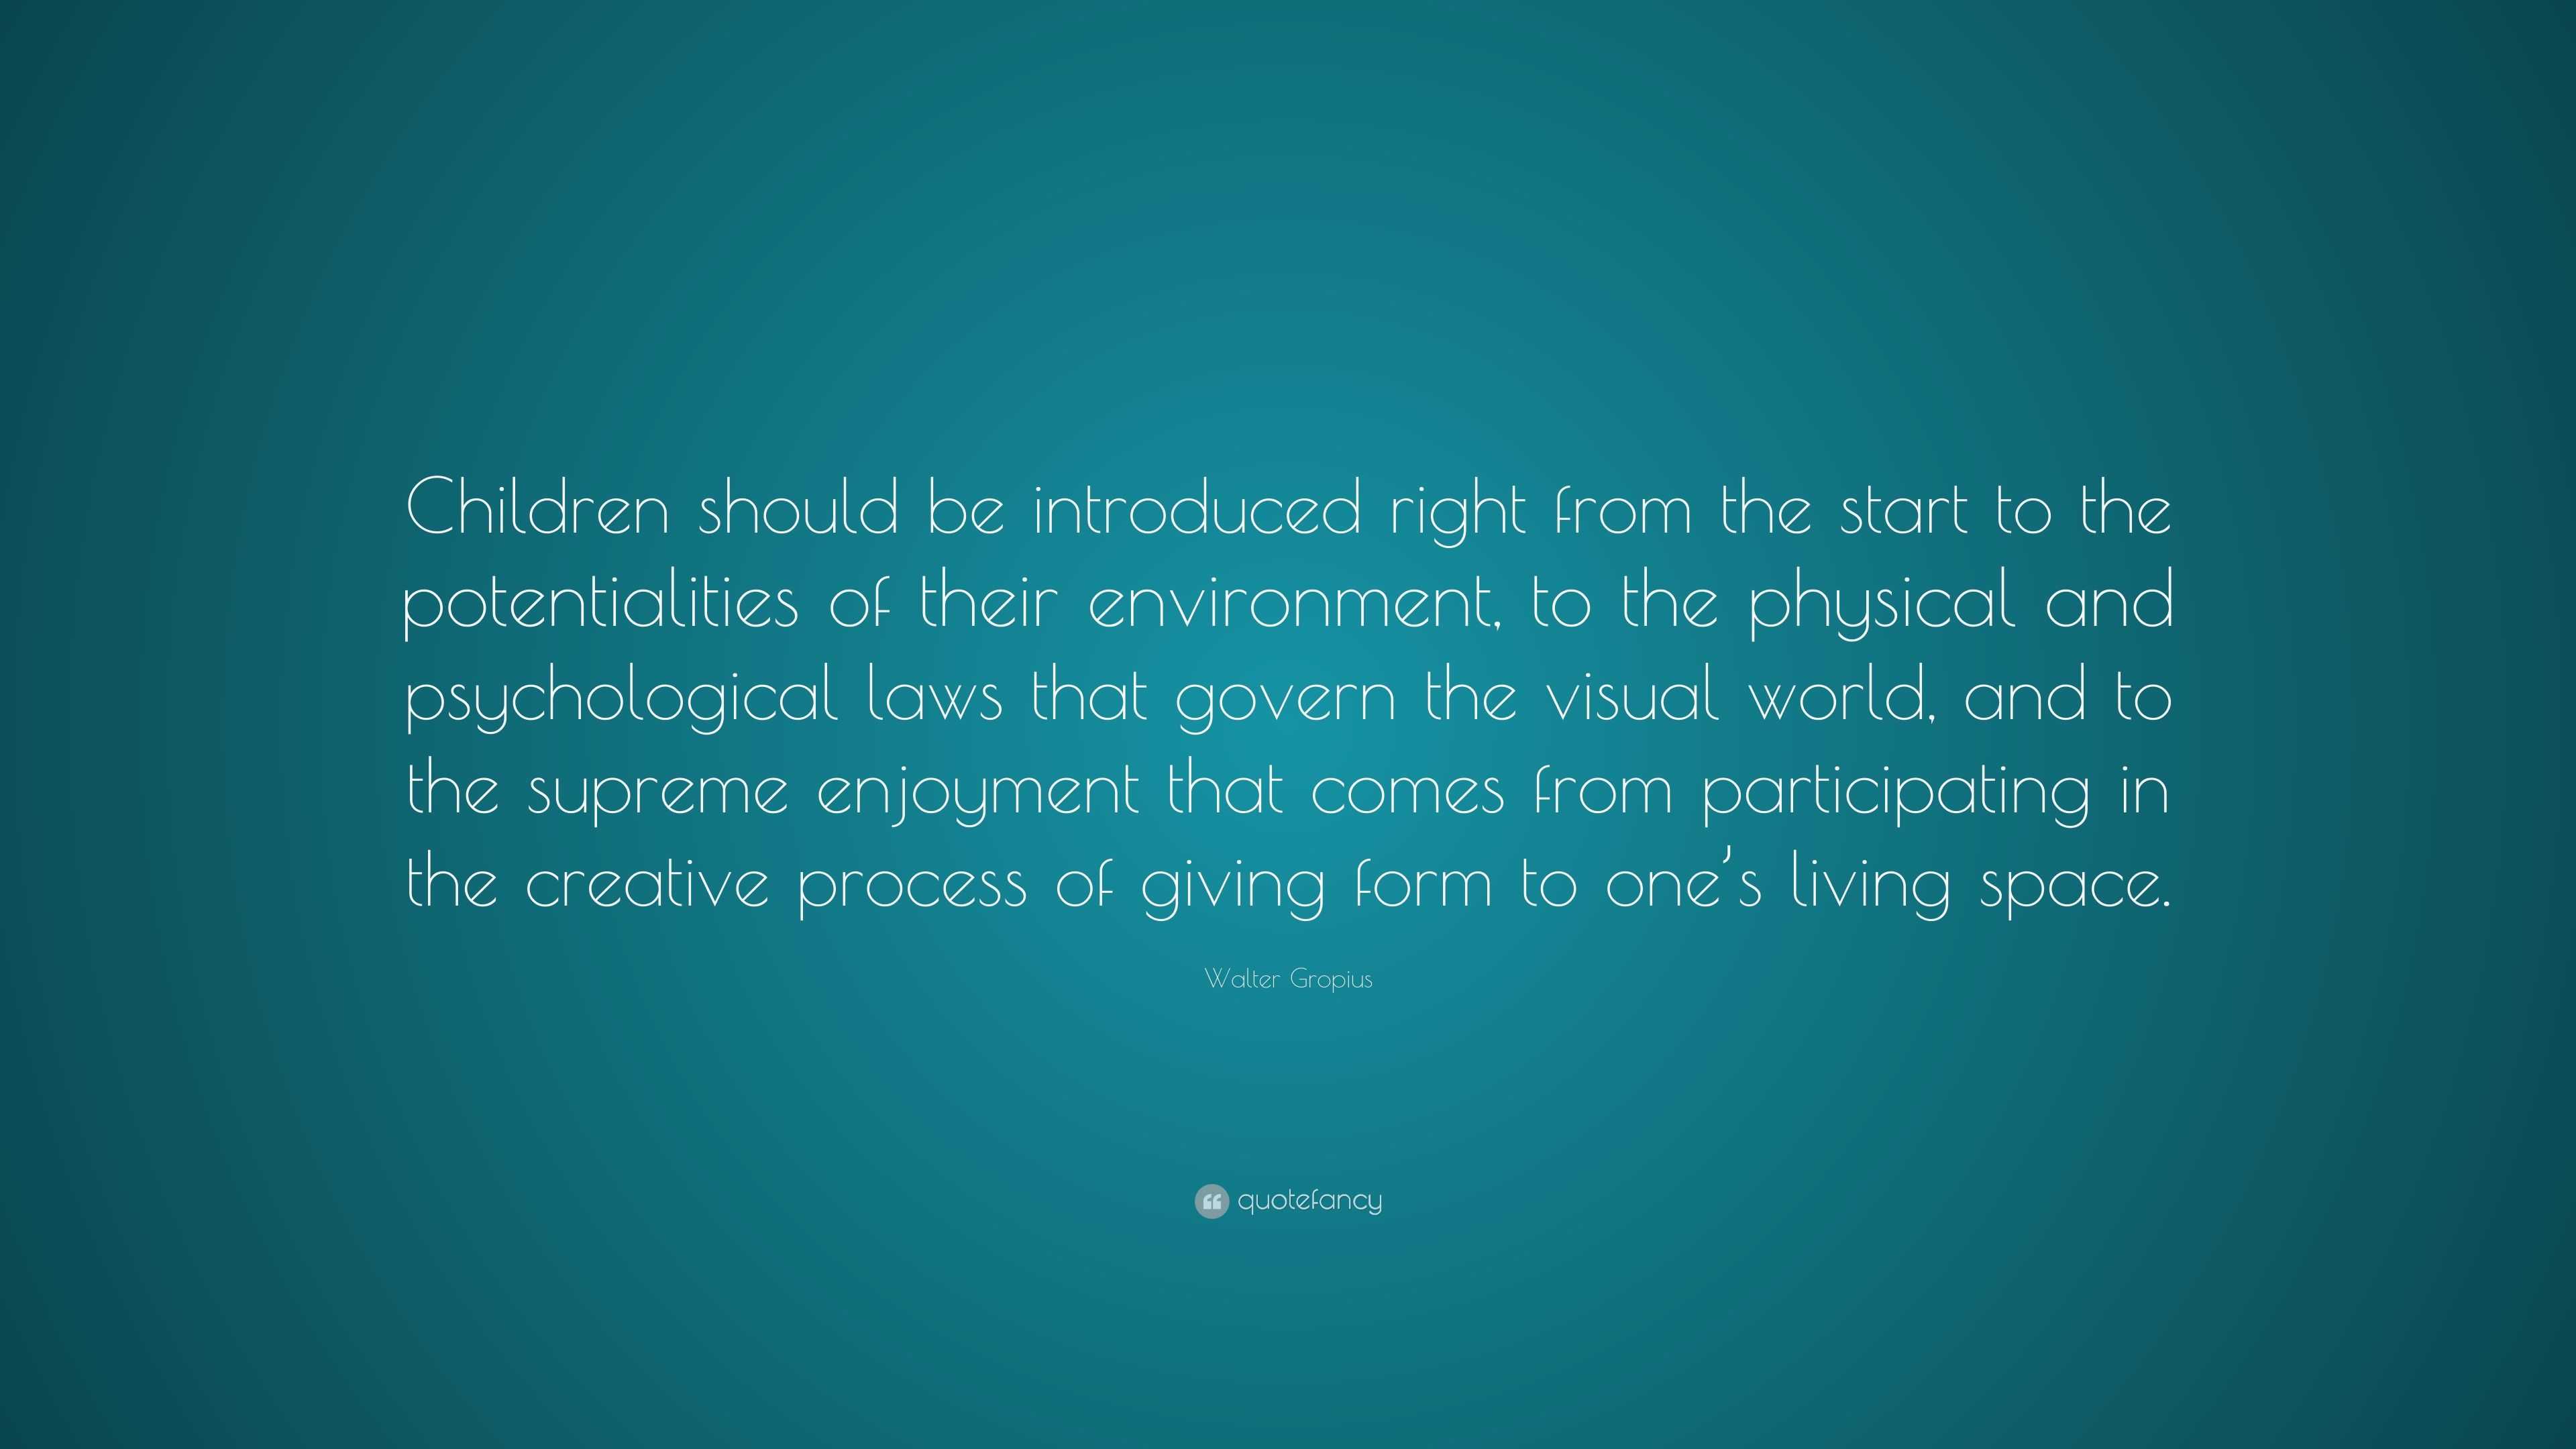 Walter Gropius Quote: “Children should be introduced right from the ...